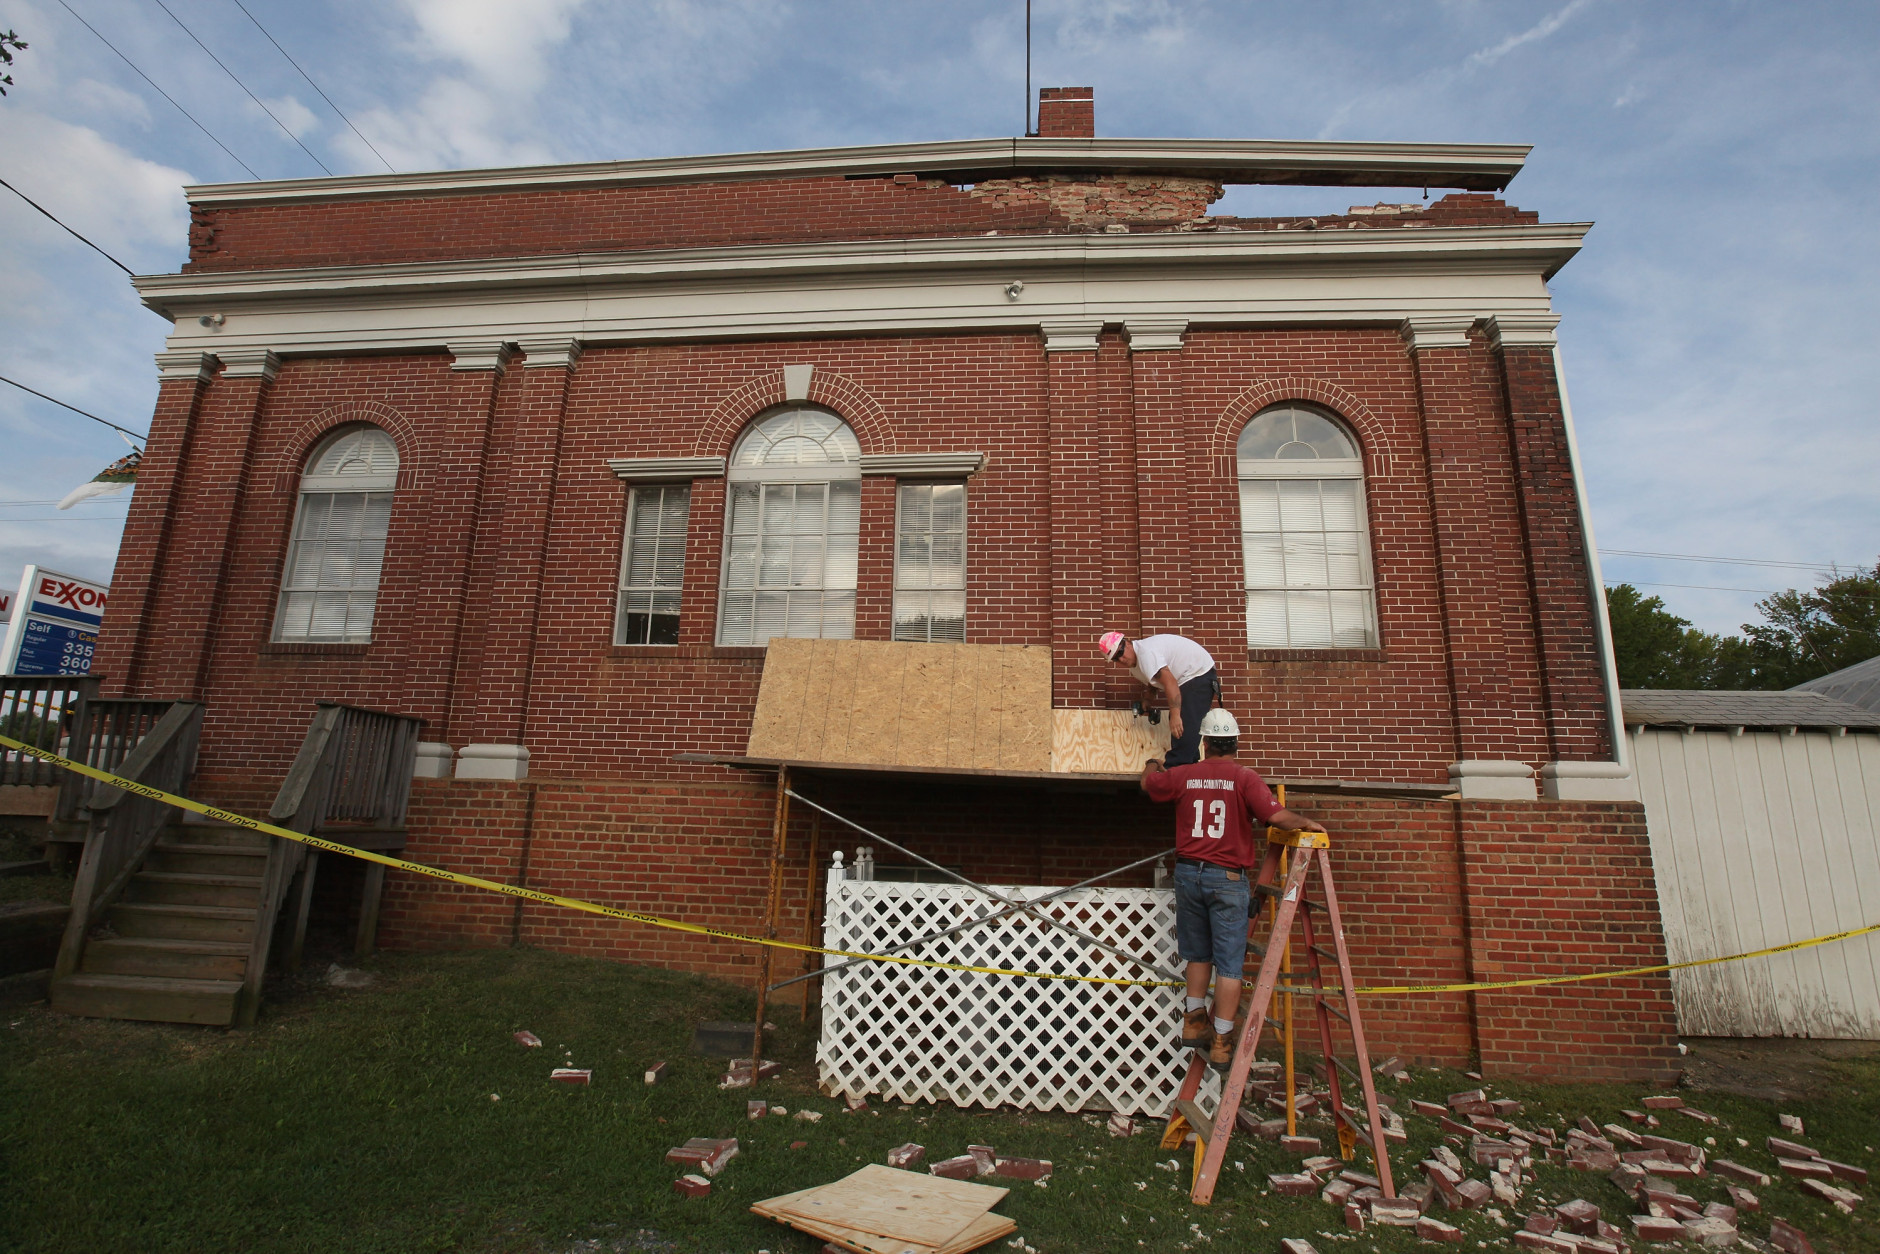 MINERAL, VA - AUGUST 24:  Workers begin repairs on the City Hall building, which is also the local DMV office, after the building was damged by yesterday's 5.8 earthquake August 24, 2011 in Mineral, Virginia. The epicenter of the quake, the East Coast's largest since 1944, was located a few miles outside of Mineral, a town of 430 people located about 50 miles west of Richmond.  (Photo by Scott Olson/Getty Images)